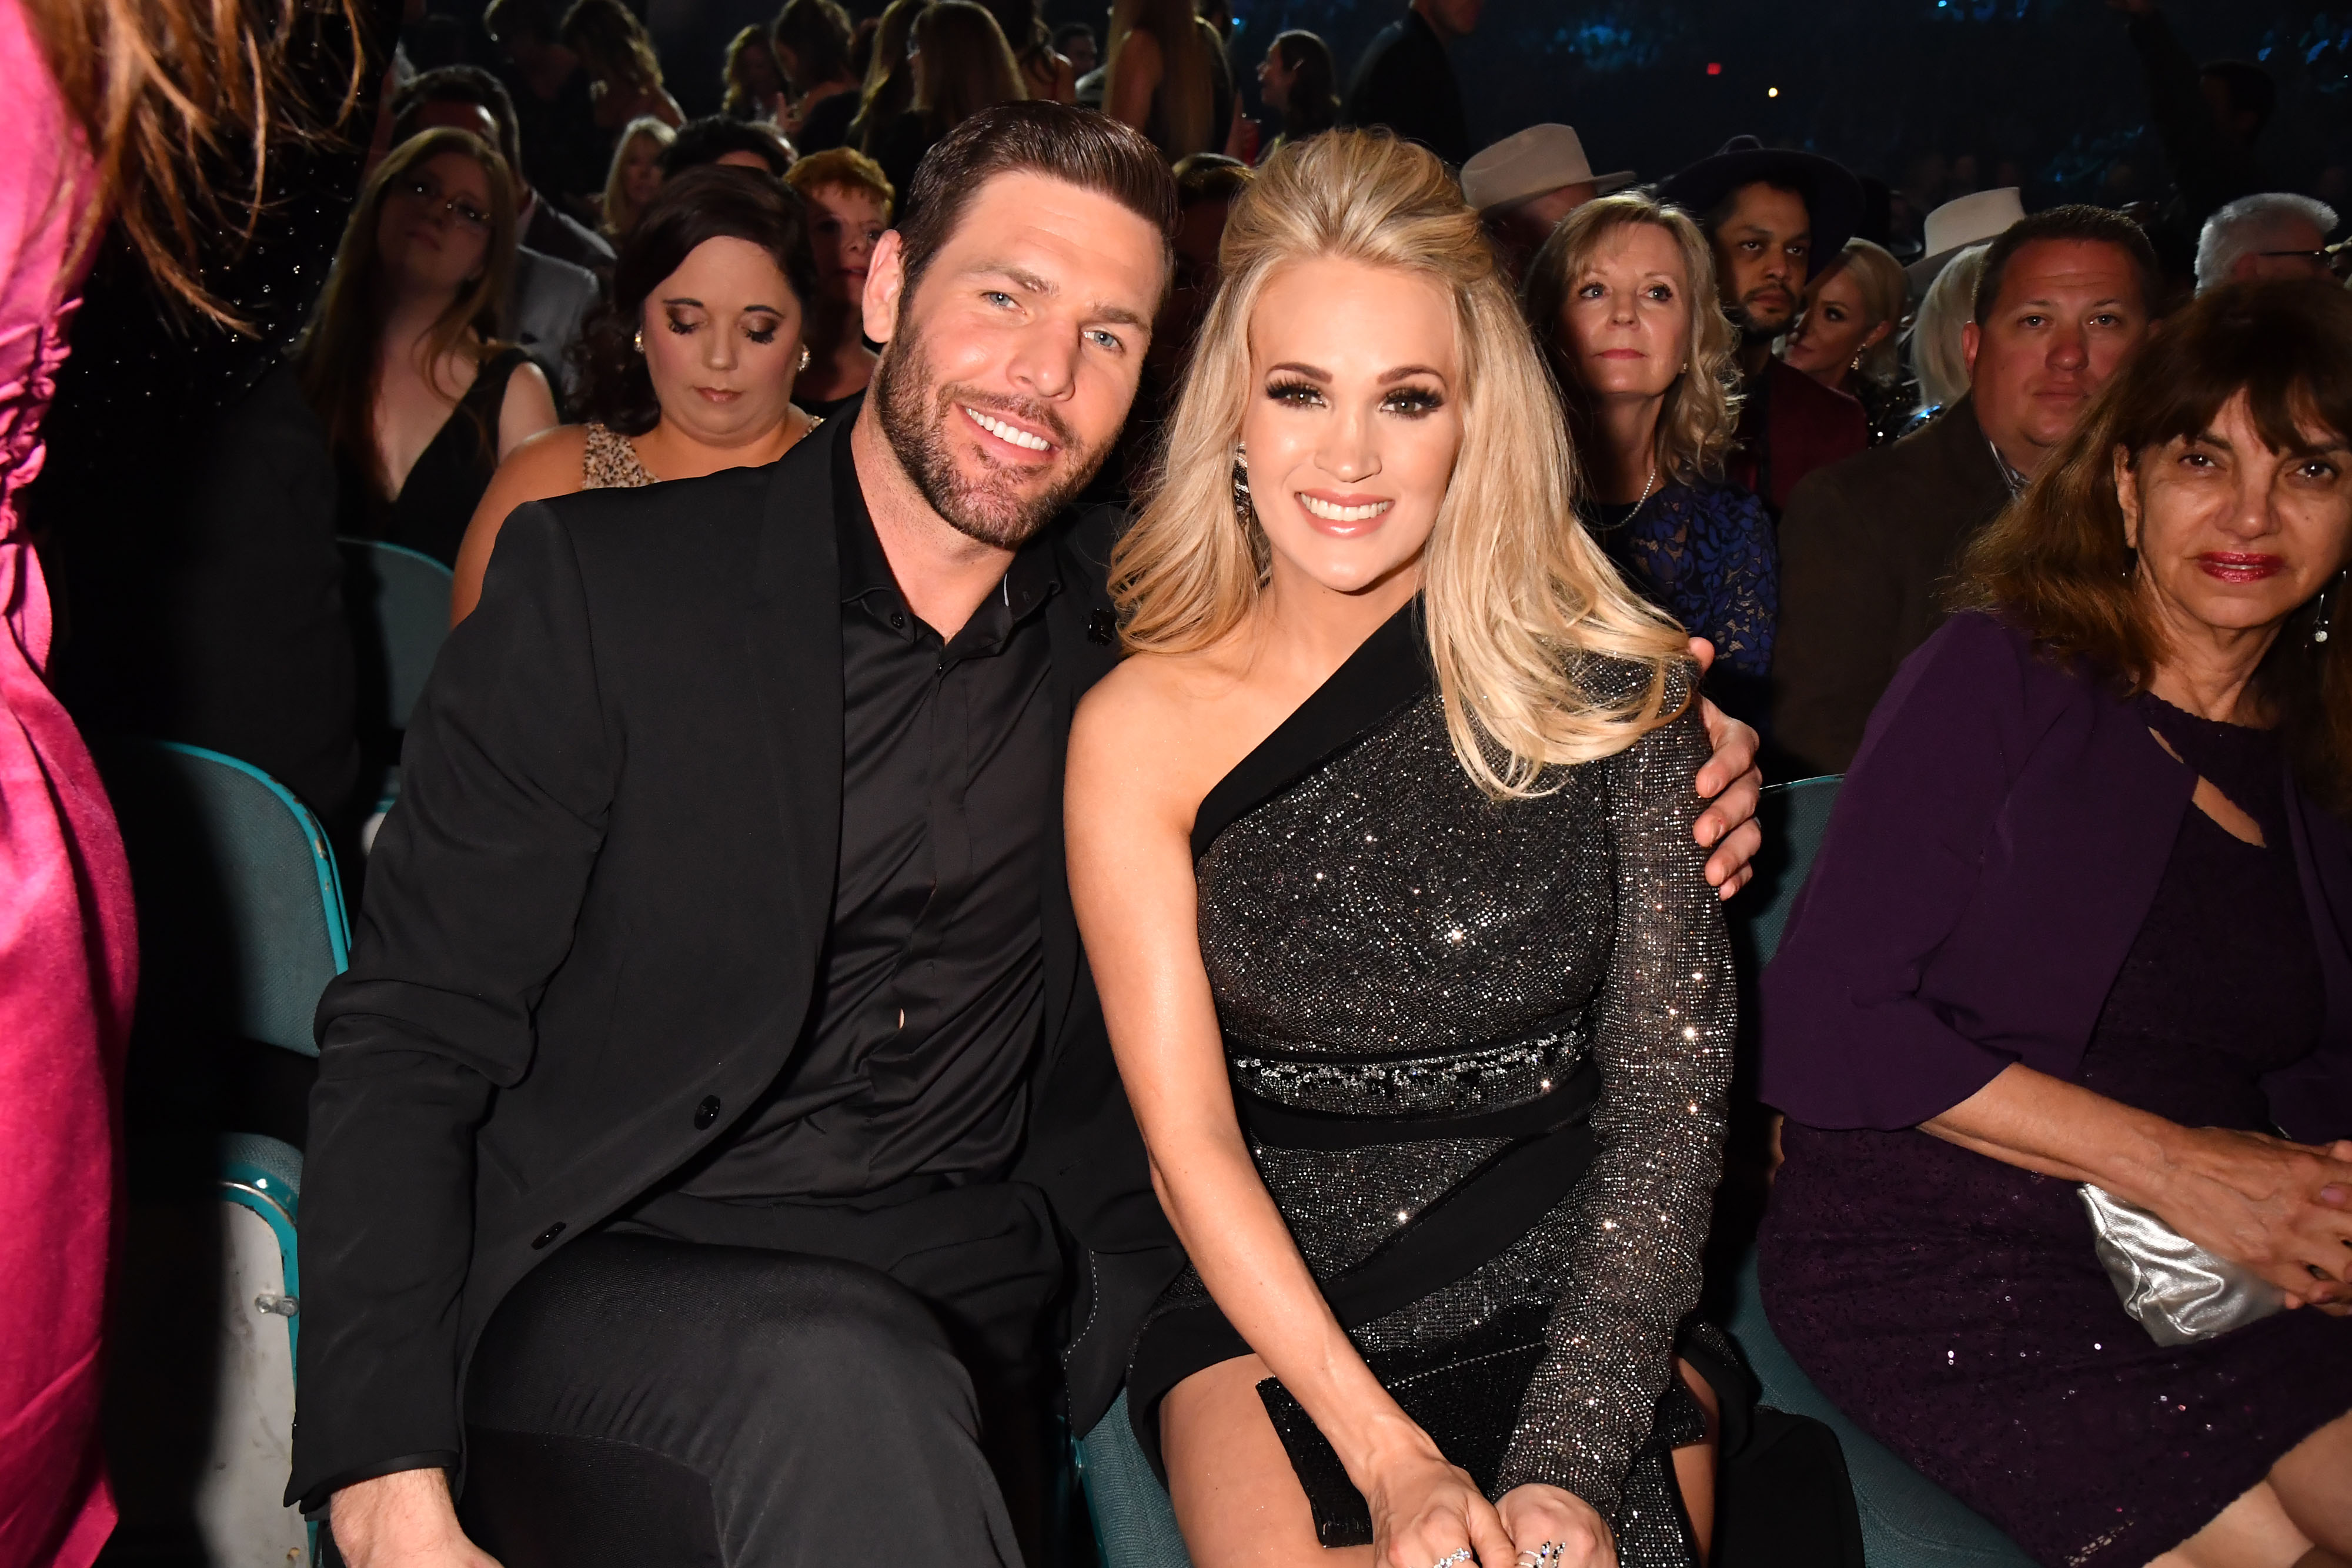 Mike Fisher and Carrie Underwood smiling